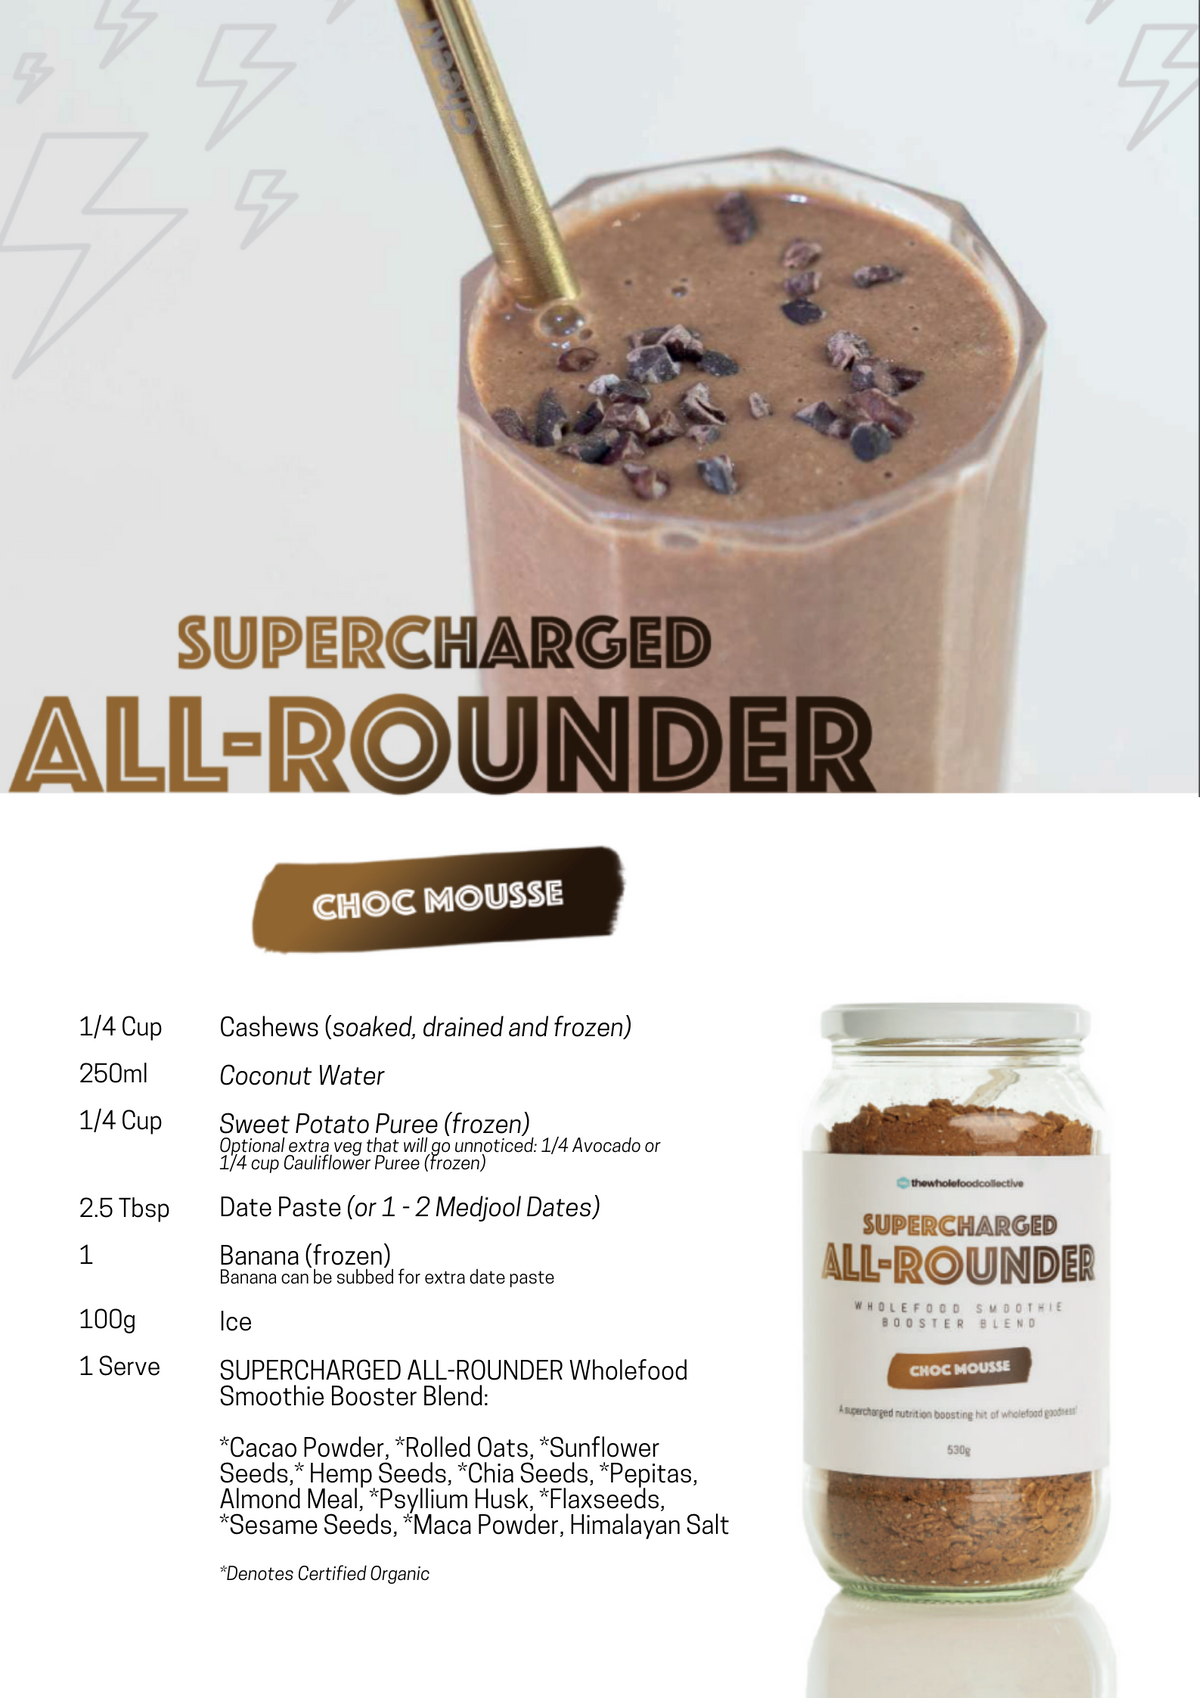 All-Rounder Smoothie Booster